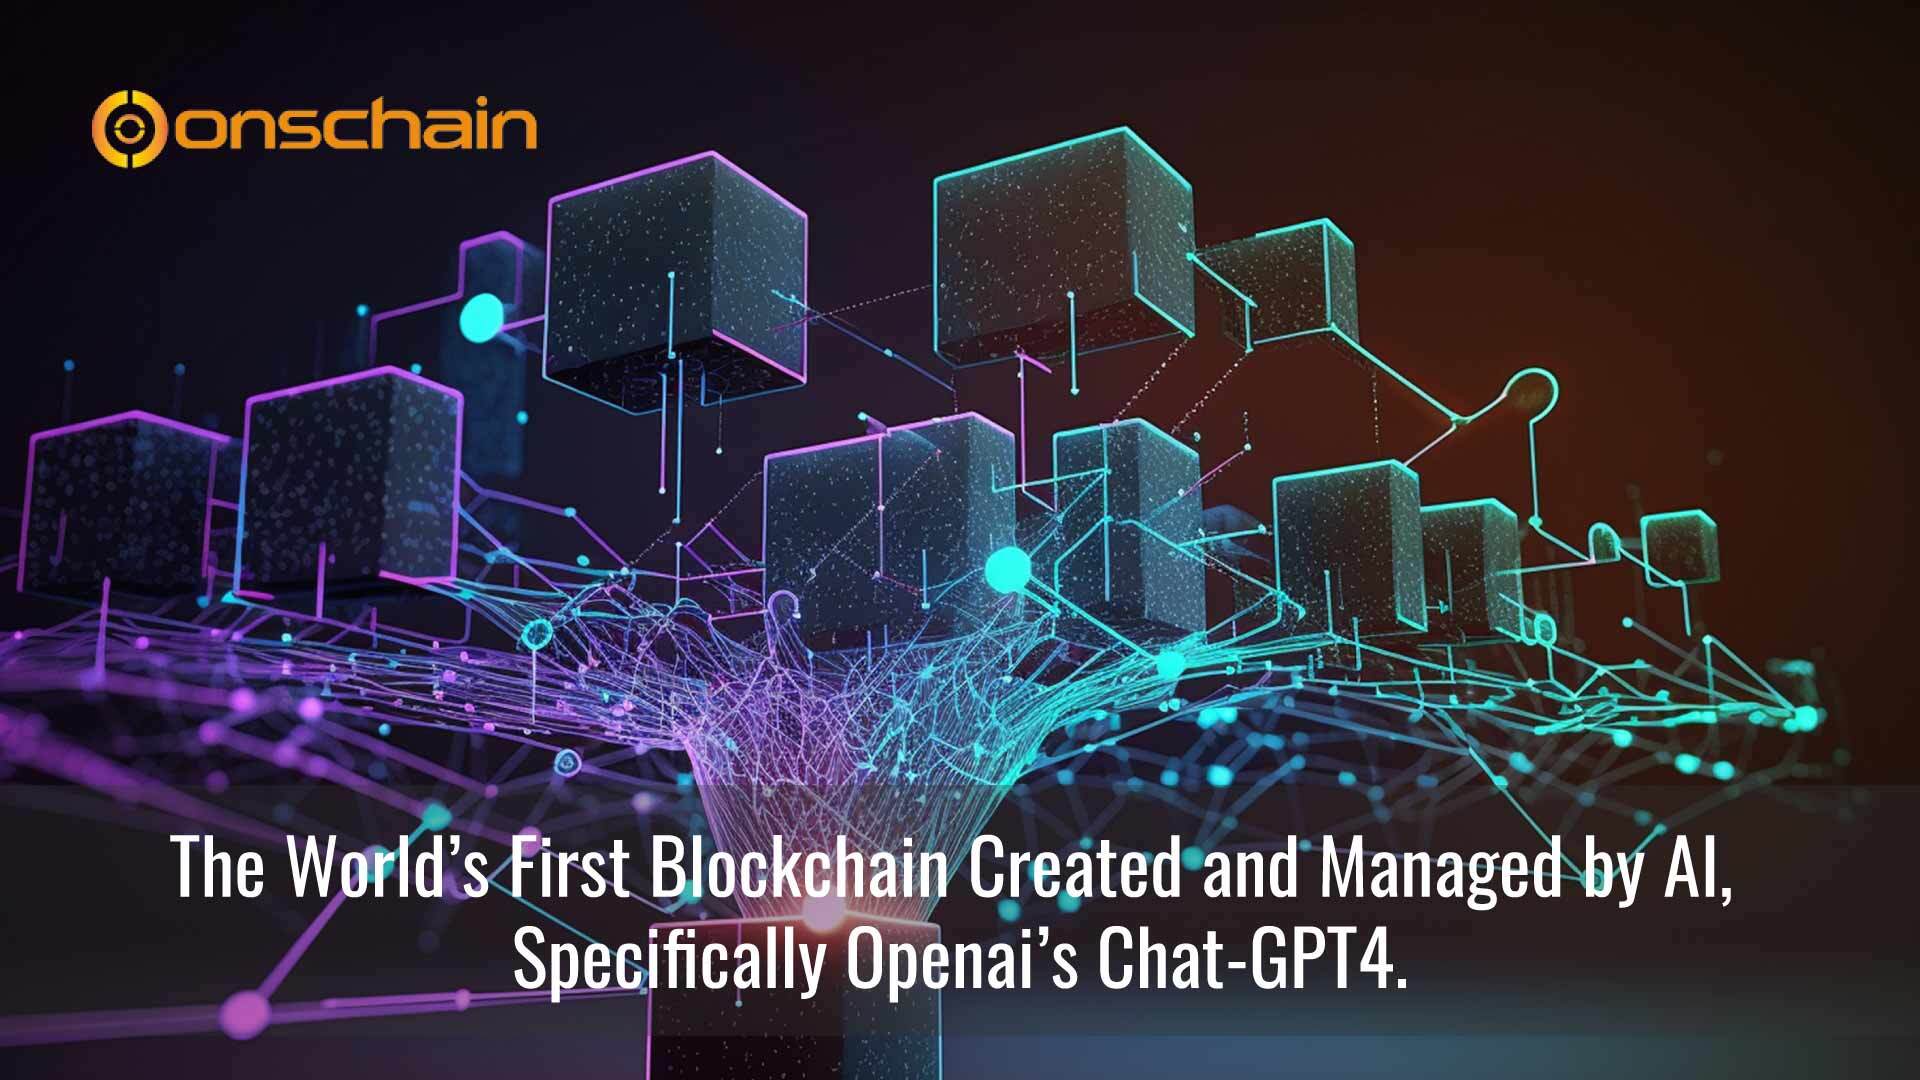 ONSCHAIN: The World’s First Blockchain Created by Chat-GPT4 and Managed by Artificial Intelligence